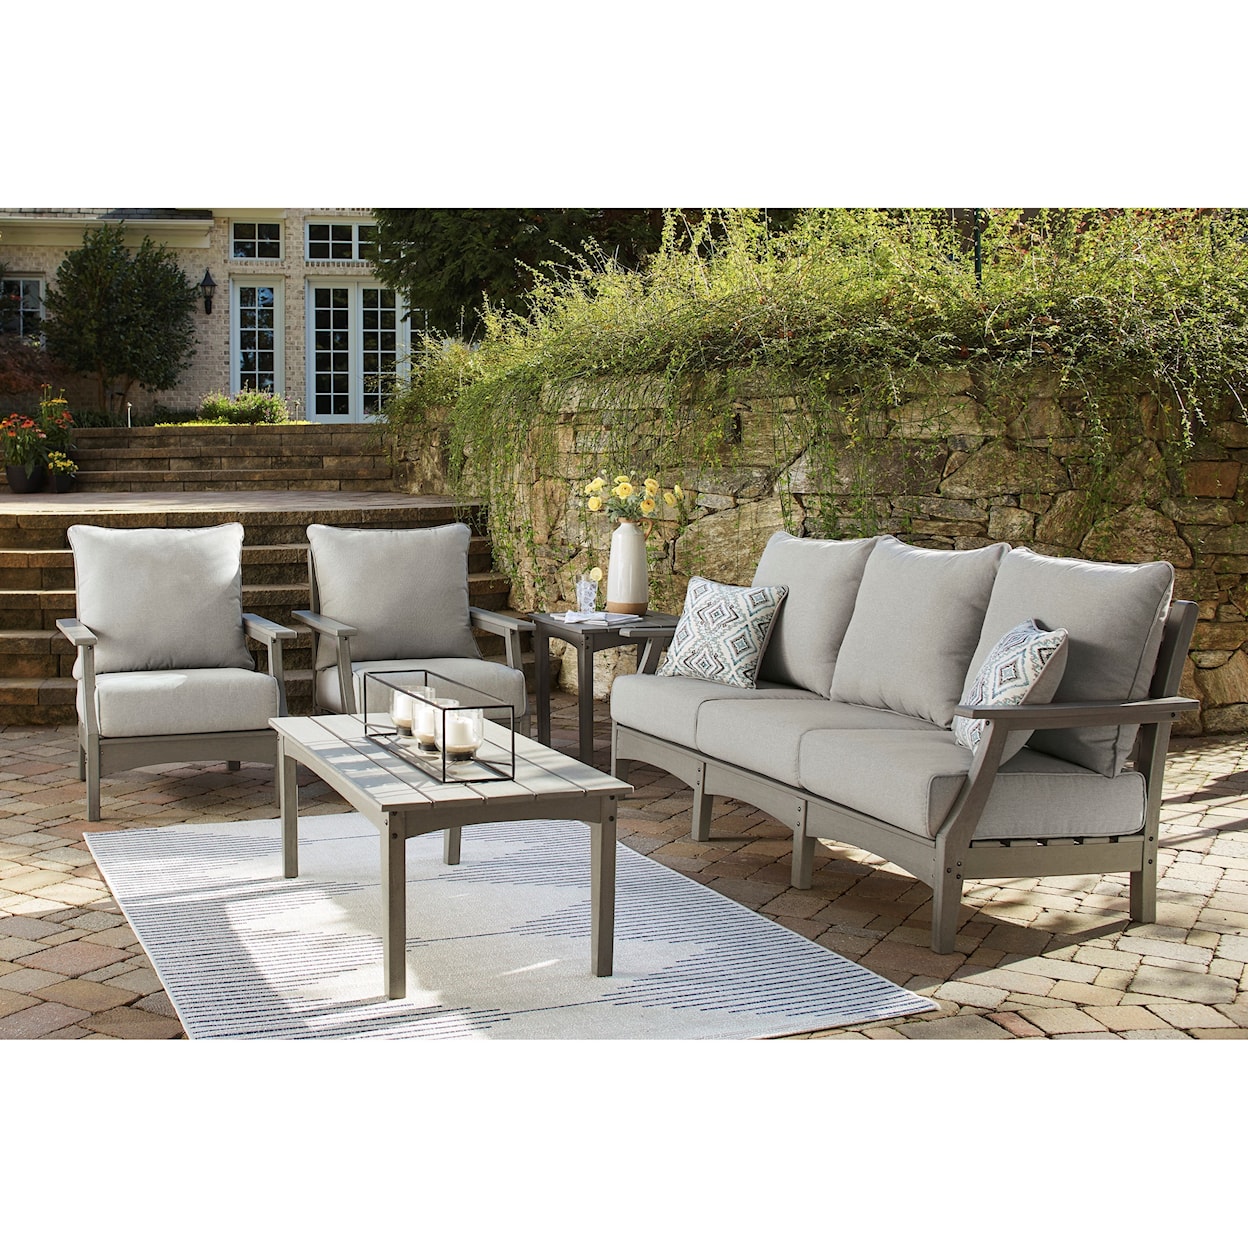 Signature Design Visola Outdoor Sofa, 2 Chairs, and Table Set